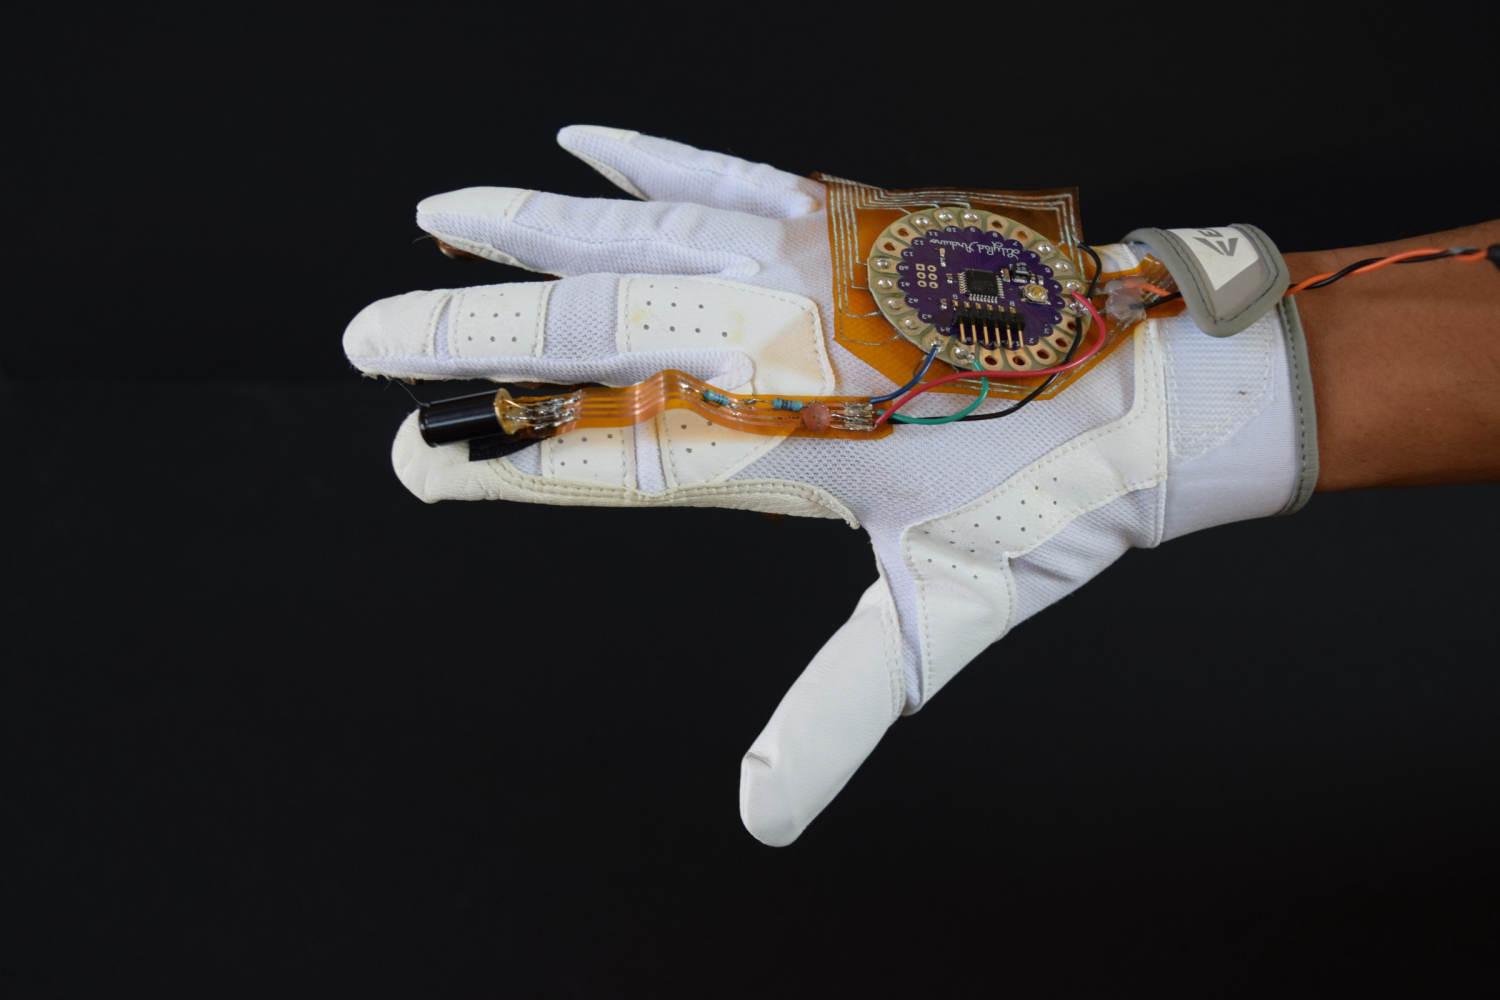  By allowing our users to try the glove on and feel the feedback, they were able to place themselves in our future. Even if the temperature glove wasn’t always practical, they were able to provide insights on other “senses” they could imagine. 